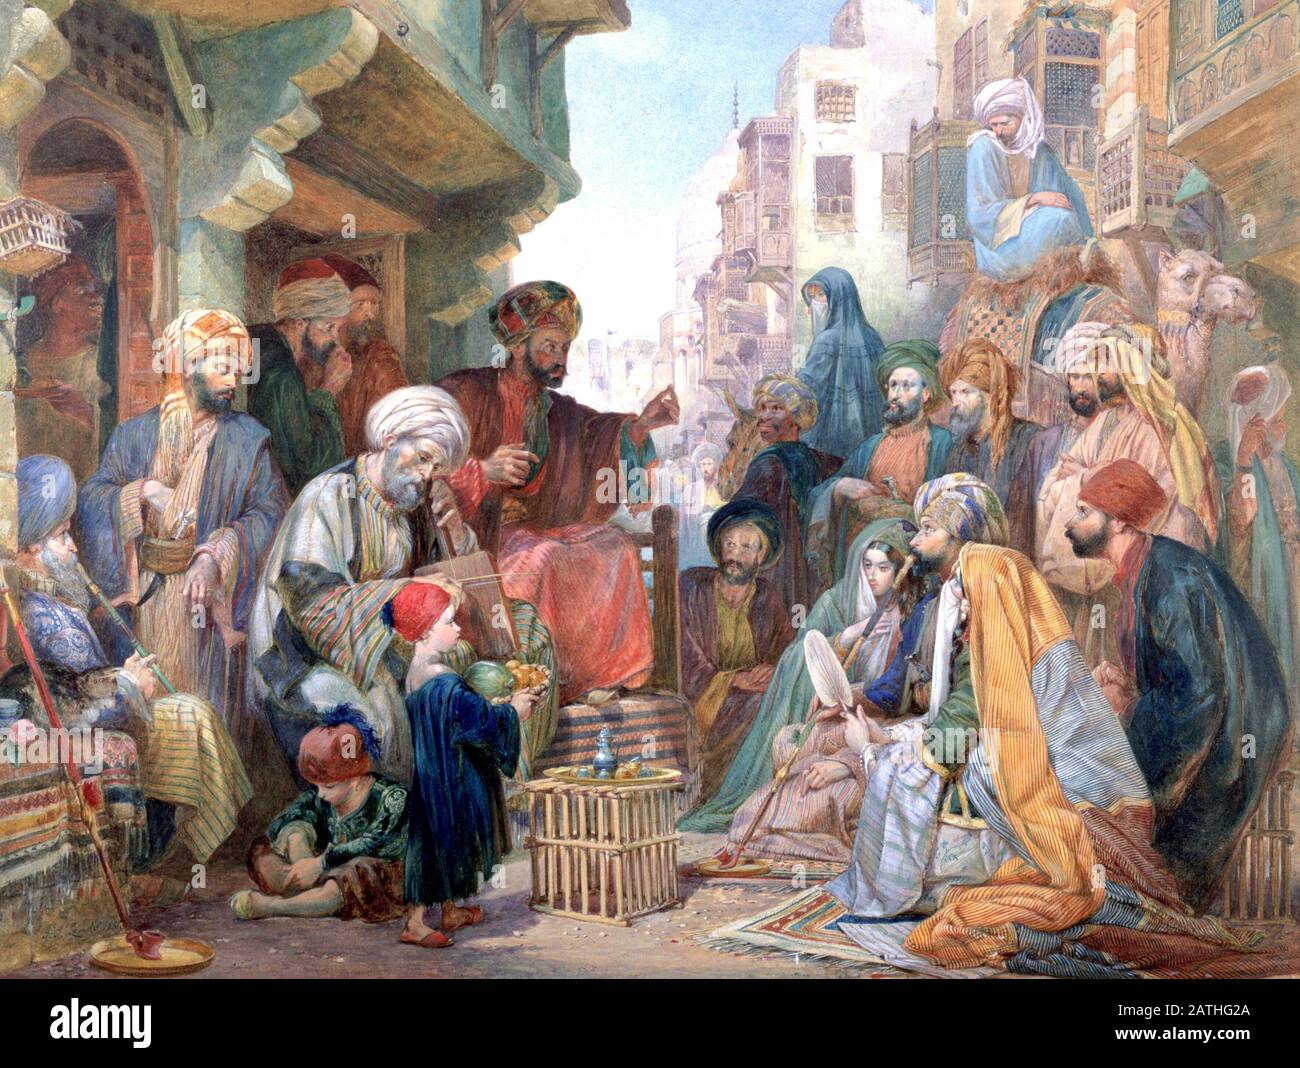 Charles Cattermole Scene in a Cairo Bazaar, Egypt', 19th Century.  Watercolour, 1856 Located in the collection at, Victoria and Albert Museum, London.  This watercolour was long mistakenly believed to be by John Frederick Lewis. Stock Photo